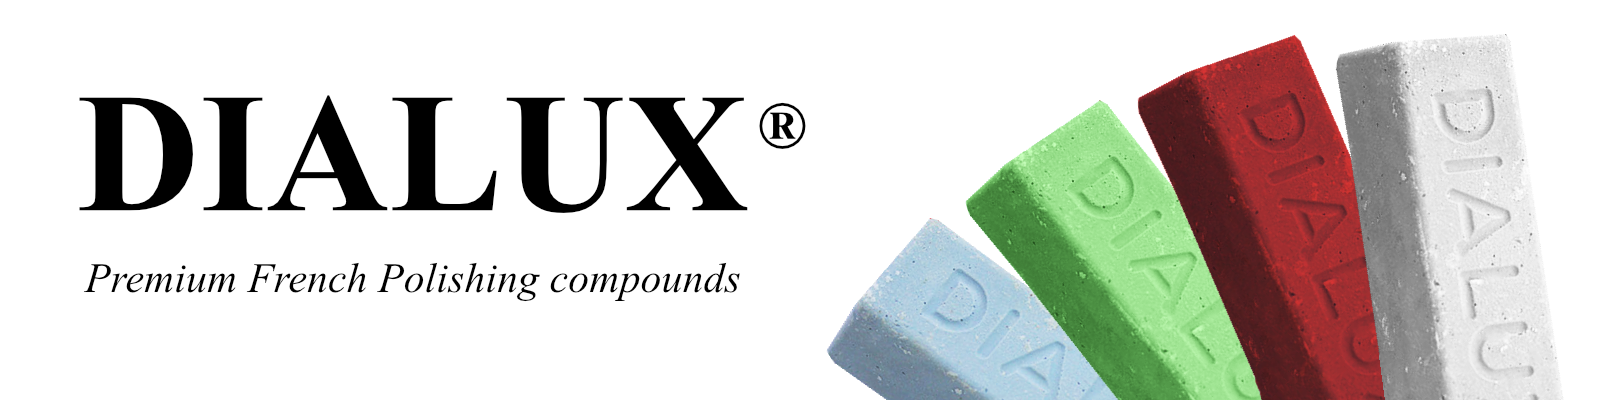 French Dialux Polishing Compounds